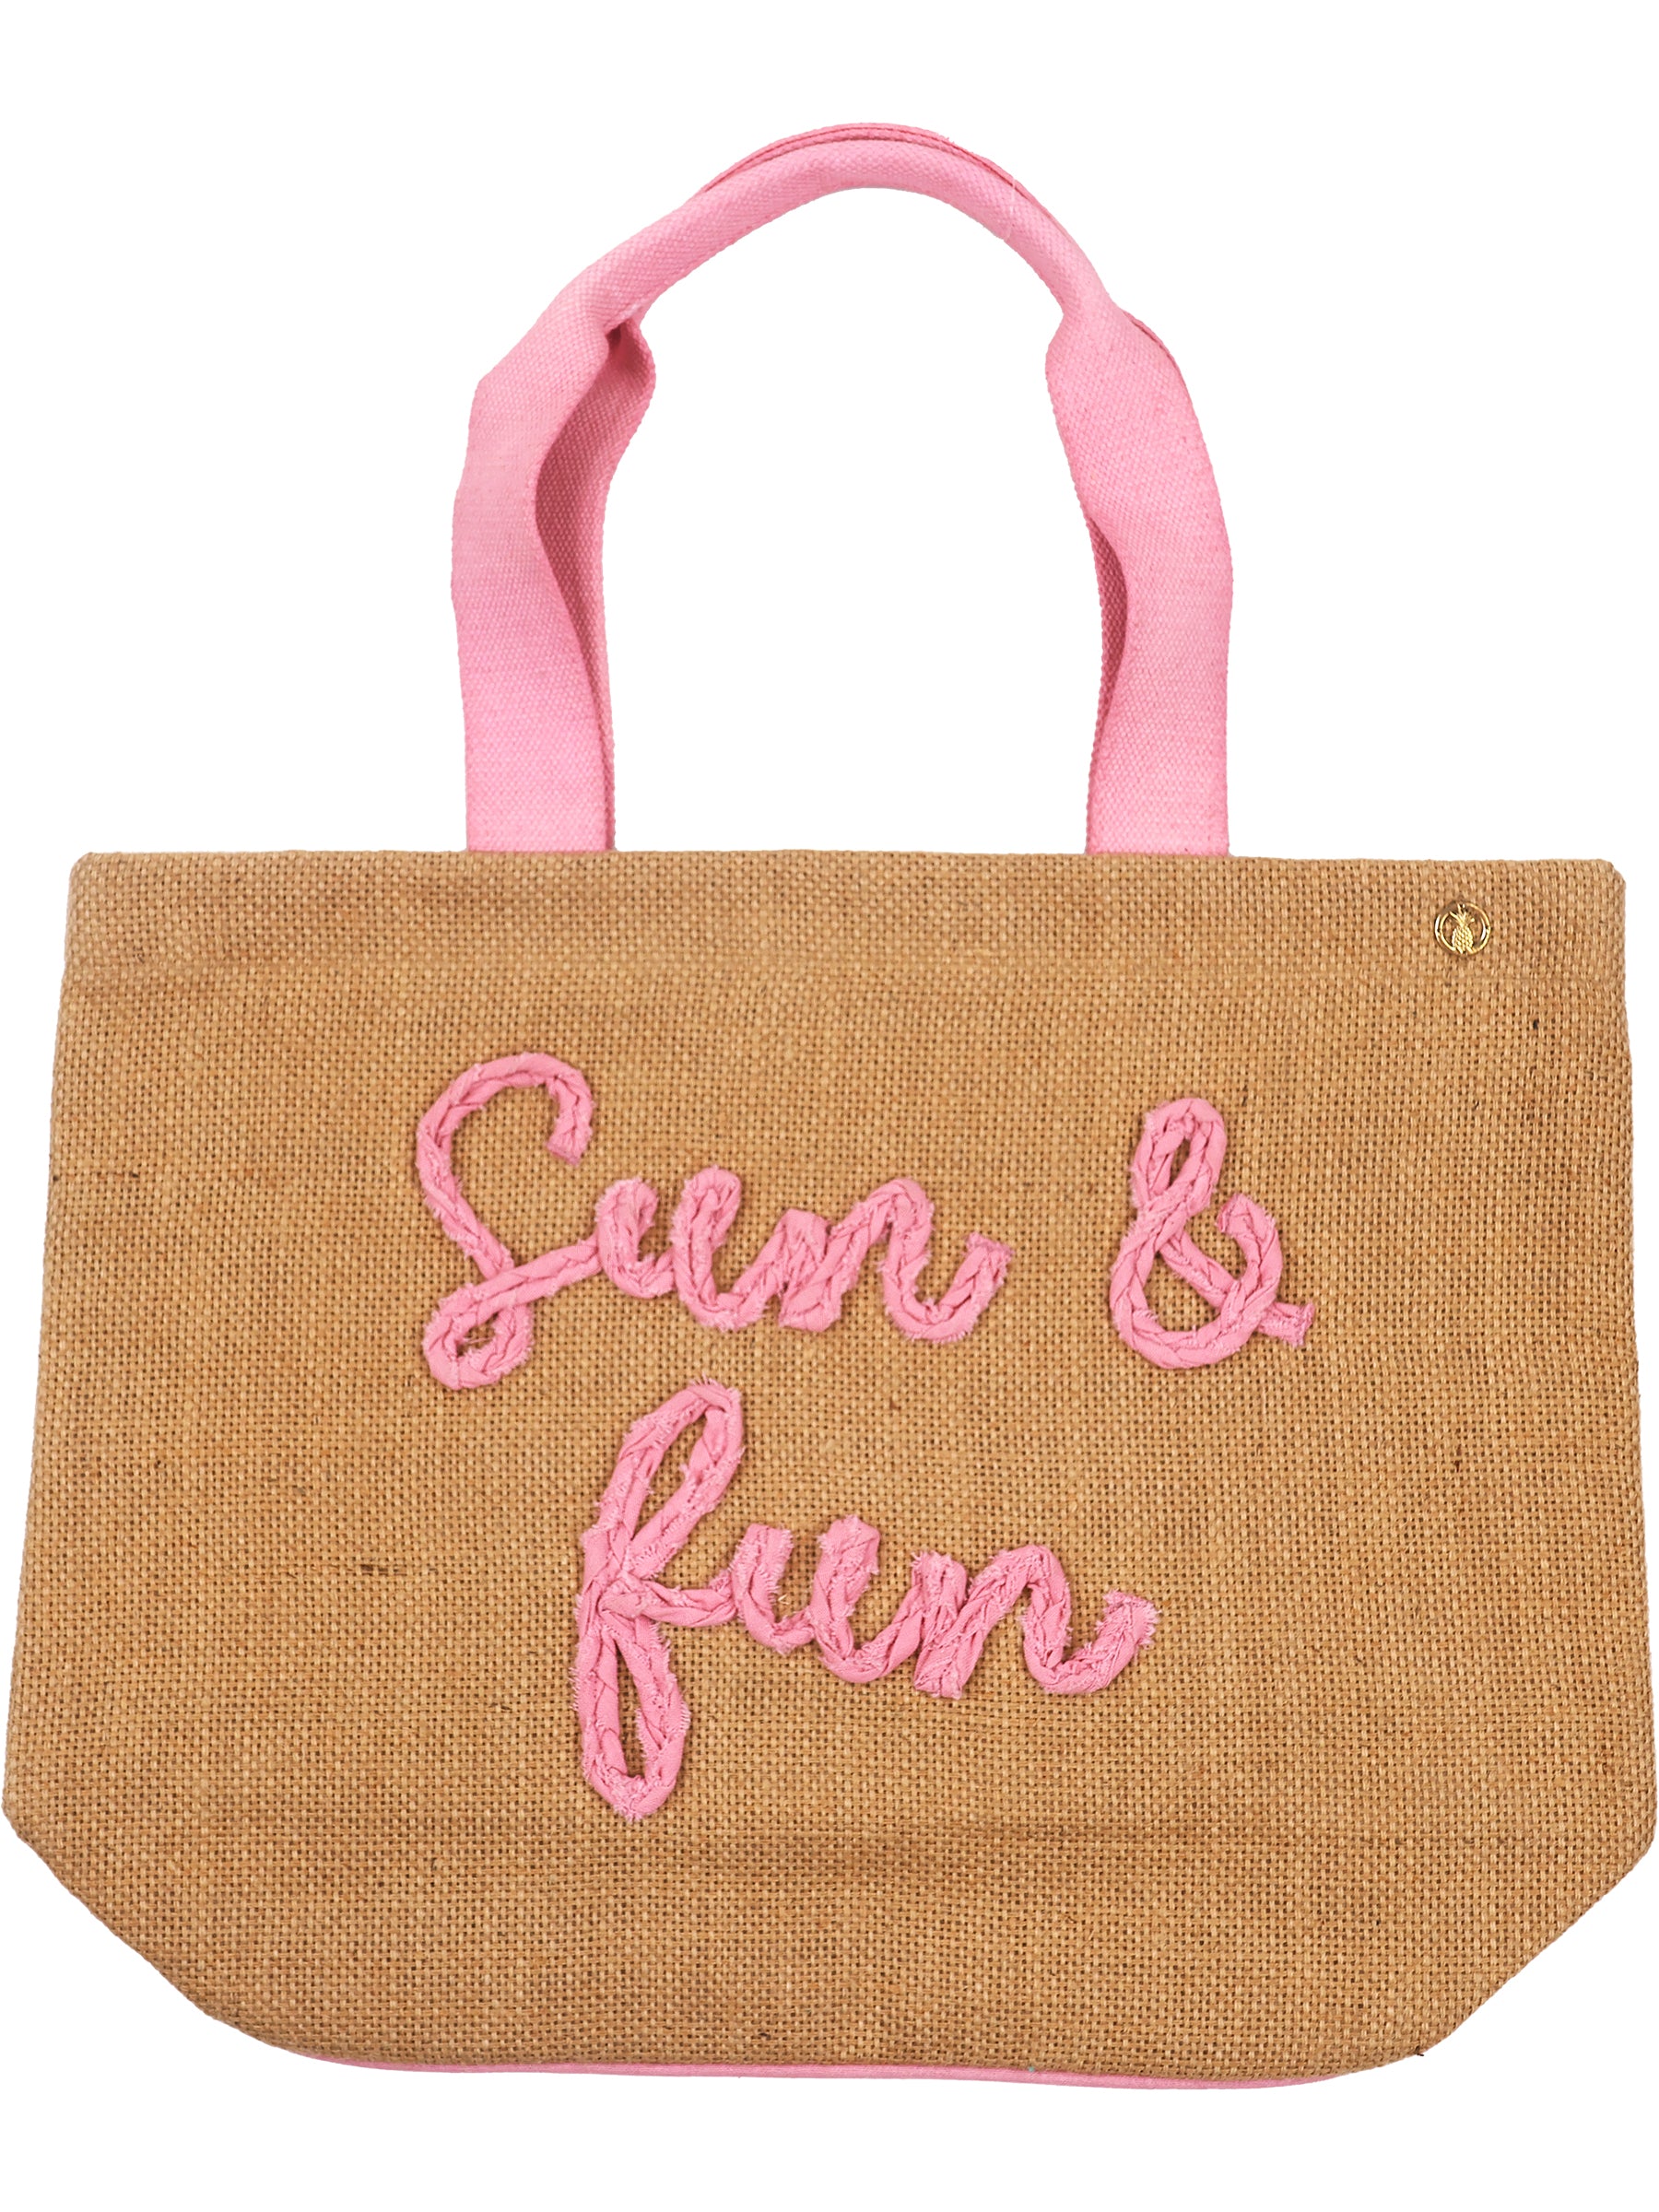 Embroidered Totes by Simply Southern